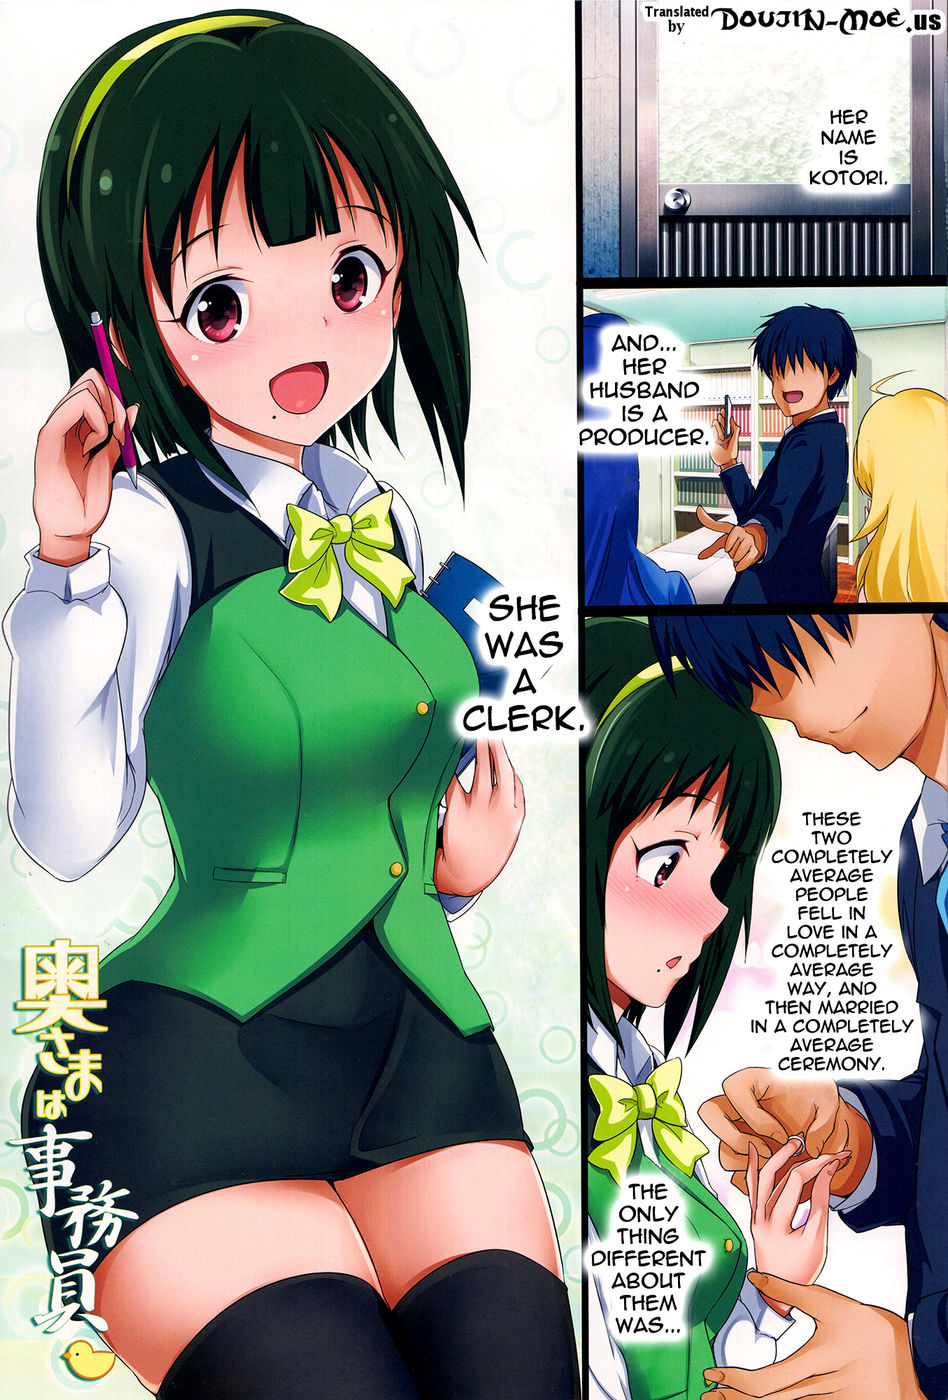 Hentai Manga Comic-My Wife is a Clerk - Obedient Kotori Edition-Read-2